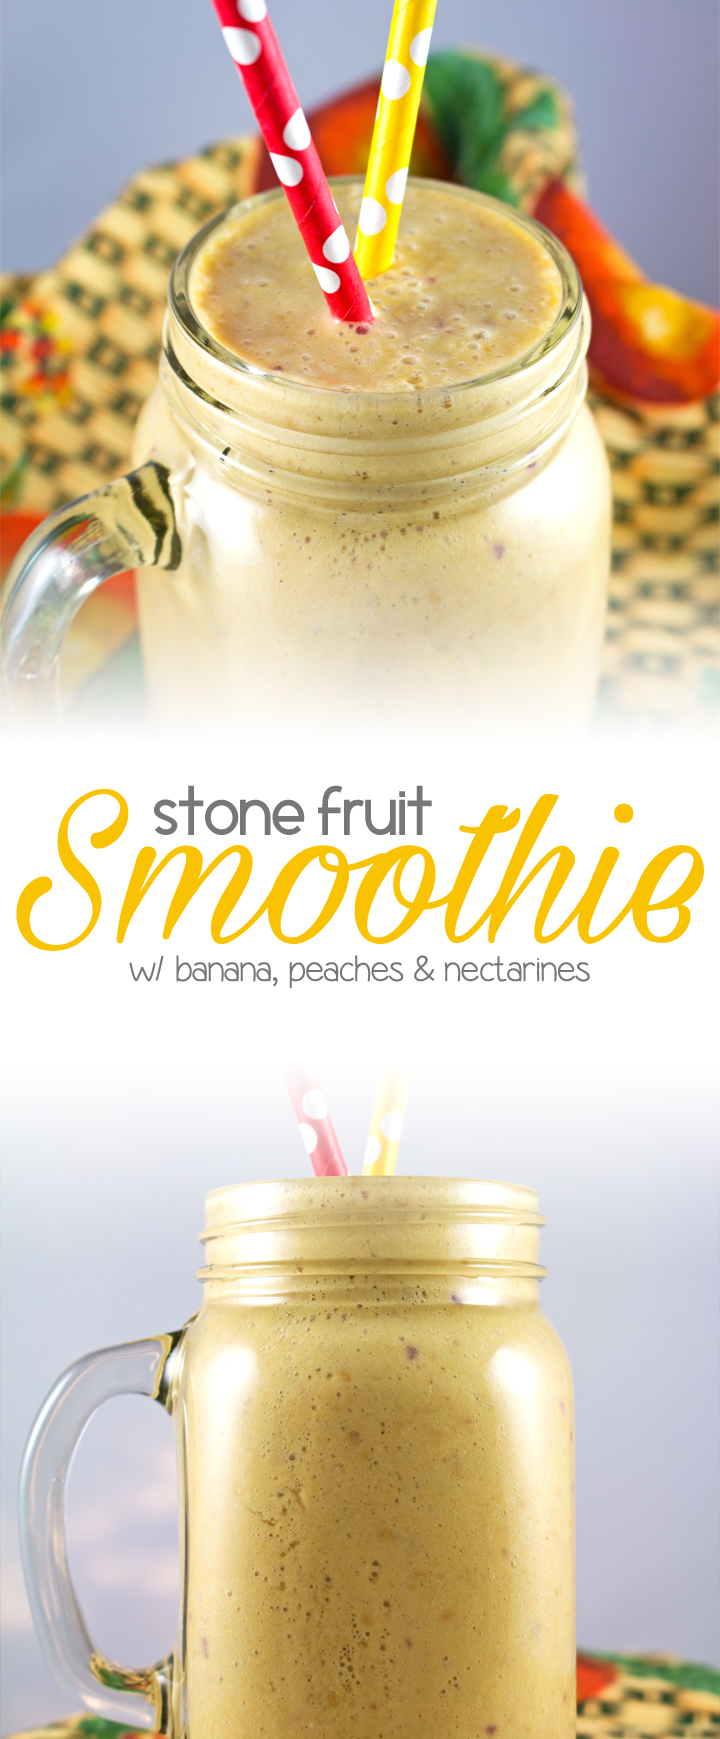 Stone Fruit Smoothie - One of my favorite smoothies, healthy & delicious. Loaded with banana, peach, nectarine, greek yogurt, honey & coconut milk!